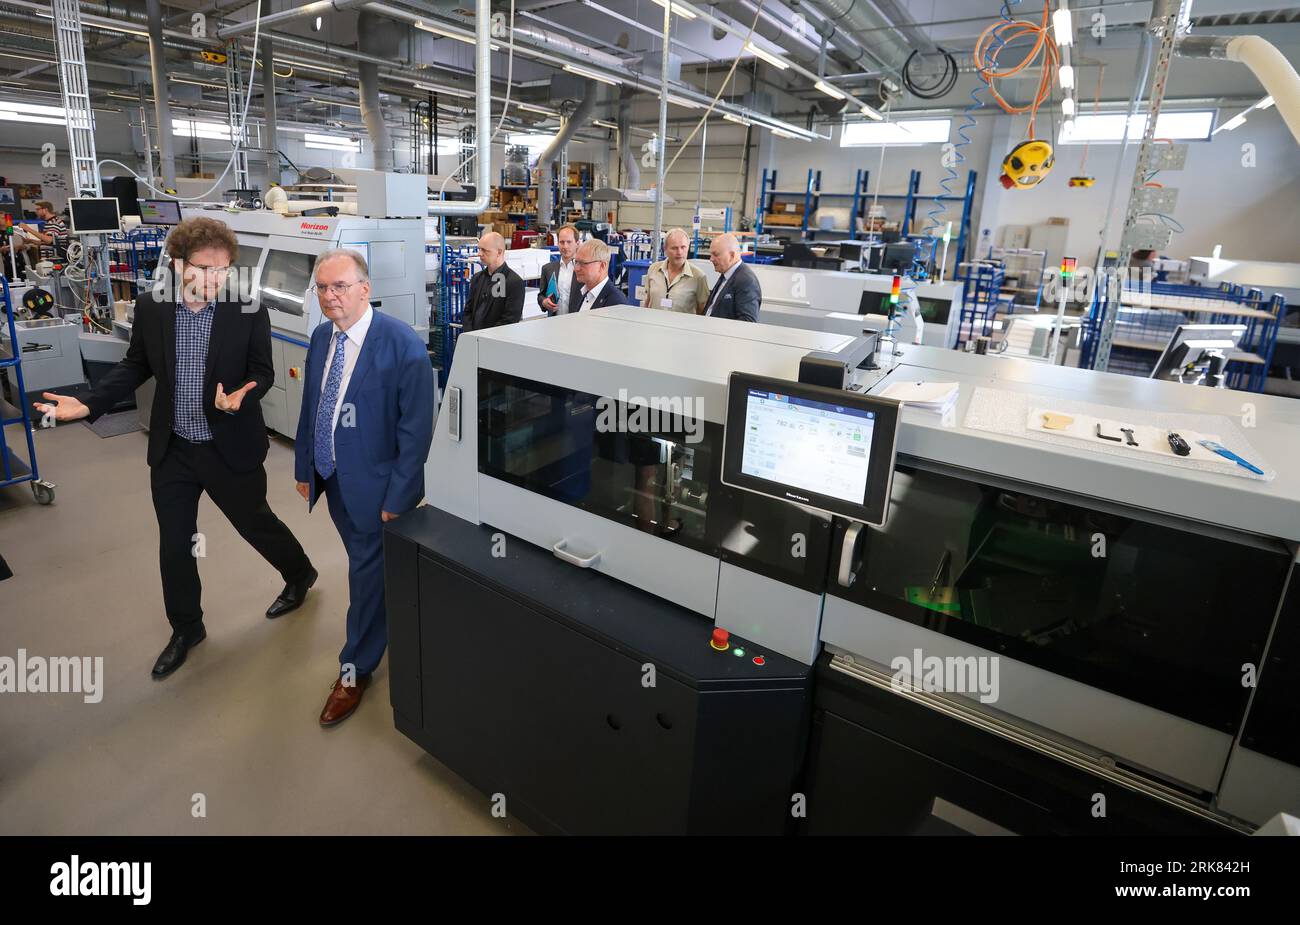 24 August 2023, Saxony-Anhalt, Bitterfeld-Wolfen: Björn Schwarzbach (l), Managing Director of ORWONet, gives Reiner Haseloff (CDU), Minister President of Saxony-Anhalt, a tour of ORWO's production facilities. The former Wolfen film factory, founded in 1909, became 'ORWO' (Original Wolfen) in 1964. After various takeovers in the 1990s, the company attempted to re-enter the market as a large-scale laboratory with the advent of digital photography. For 20 years, the company has now been producing for direct customers, drugstore chains and private labels, as well as end customers. The product rang Stock Photo